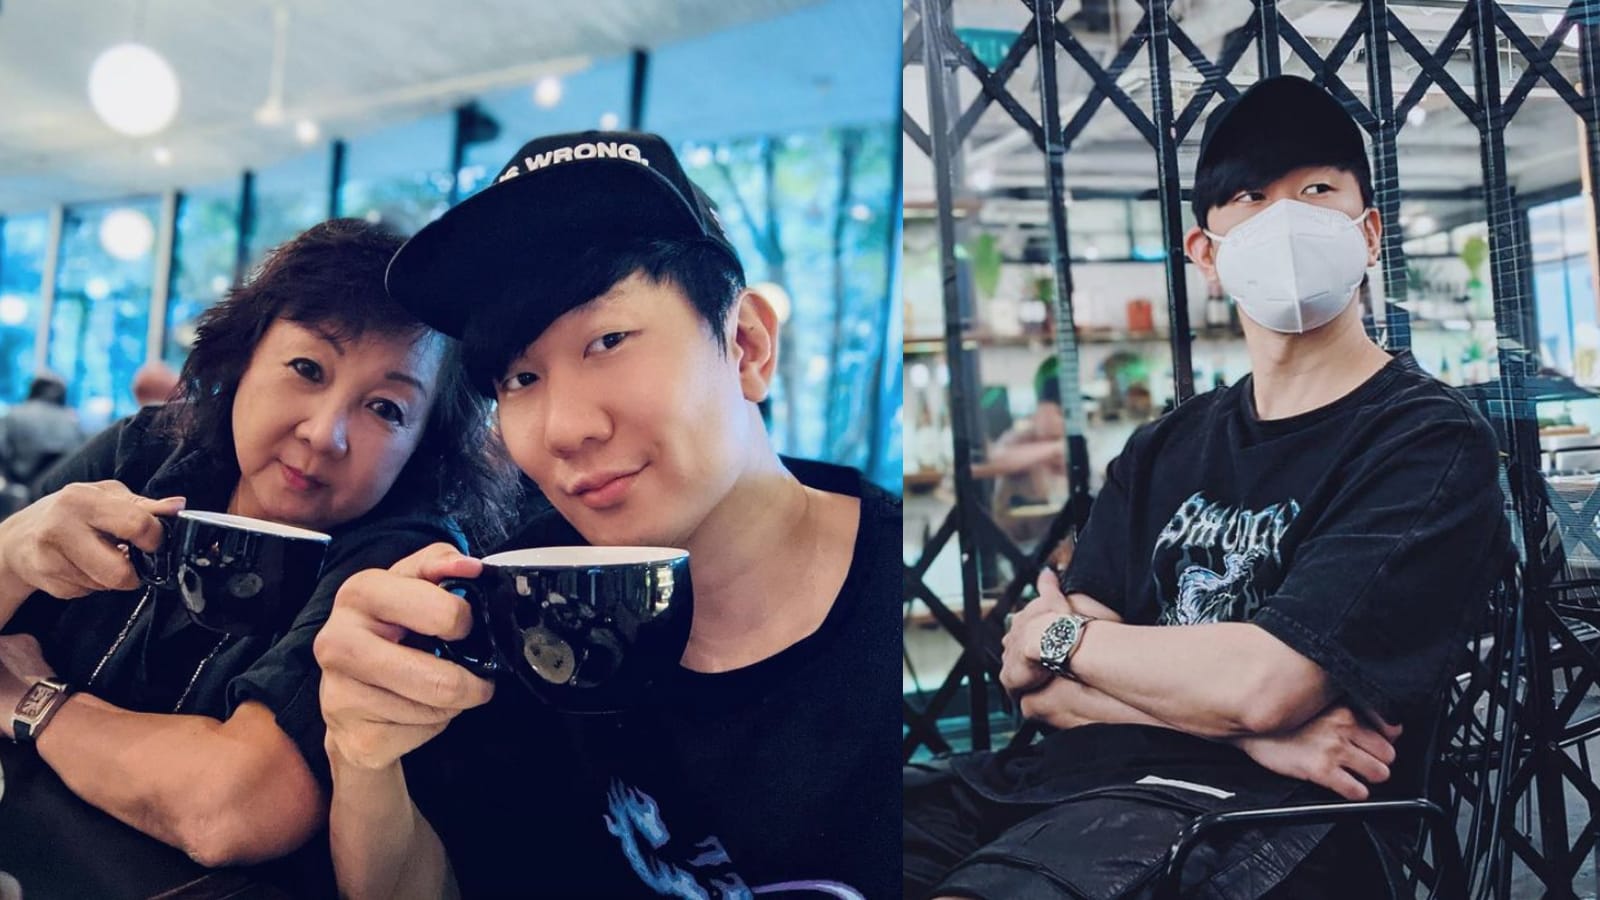 Crazy Rumour Claims JJ Lin Is The Source Of New COVID-19 Outbreak In China; Here’s How He Rubbished It